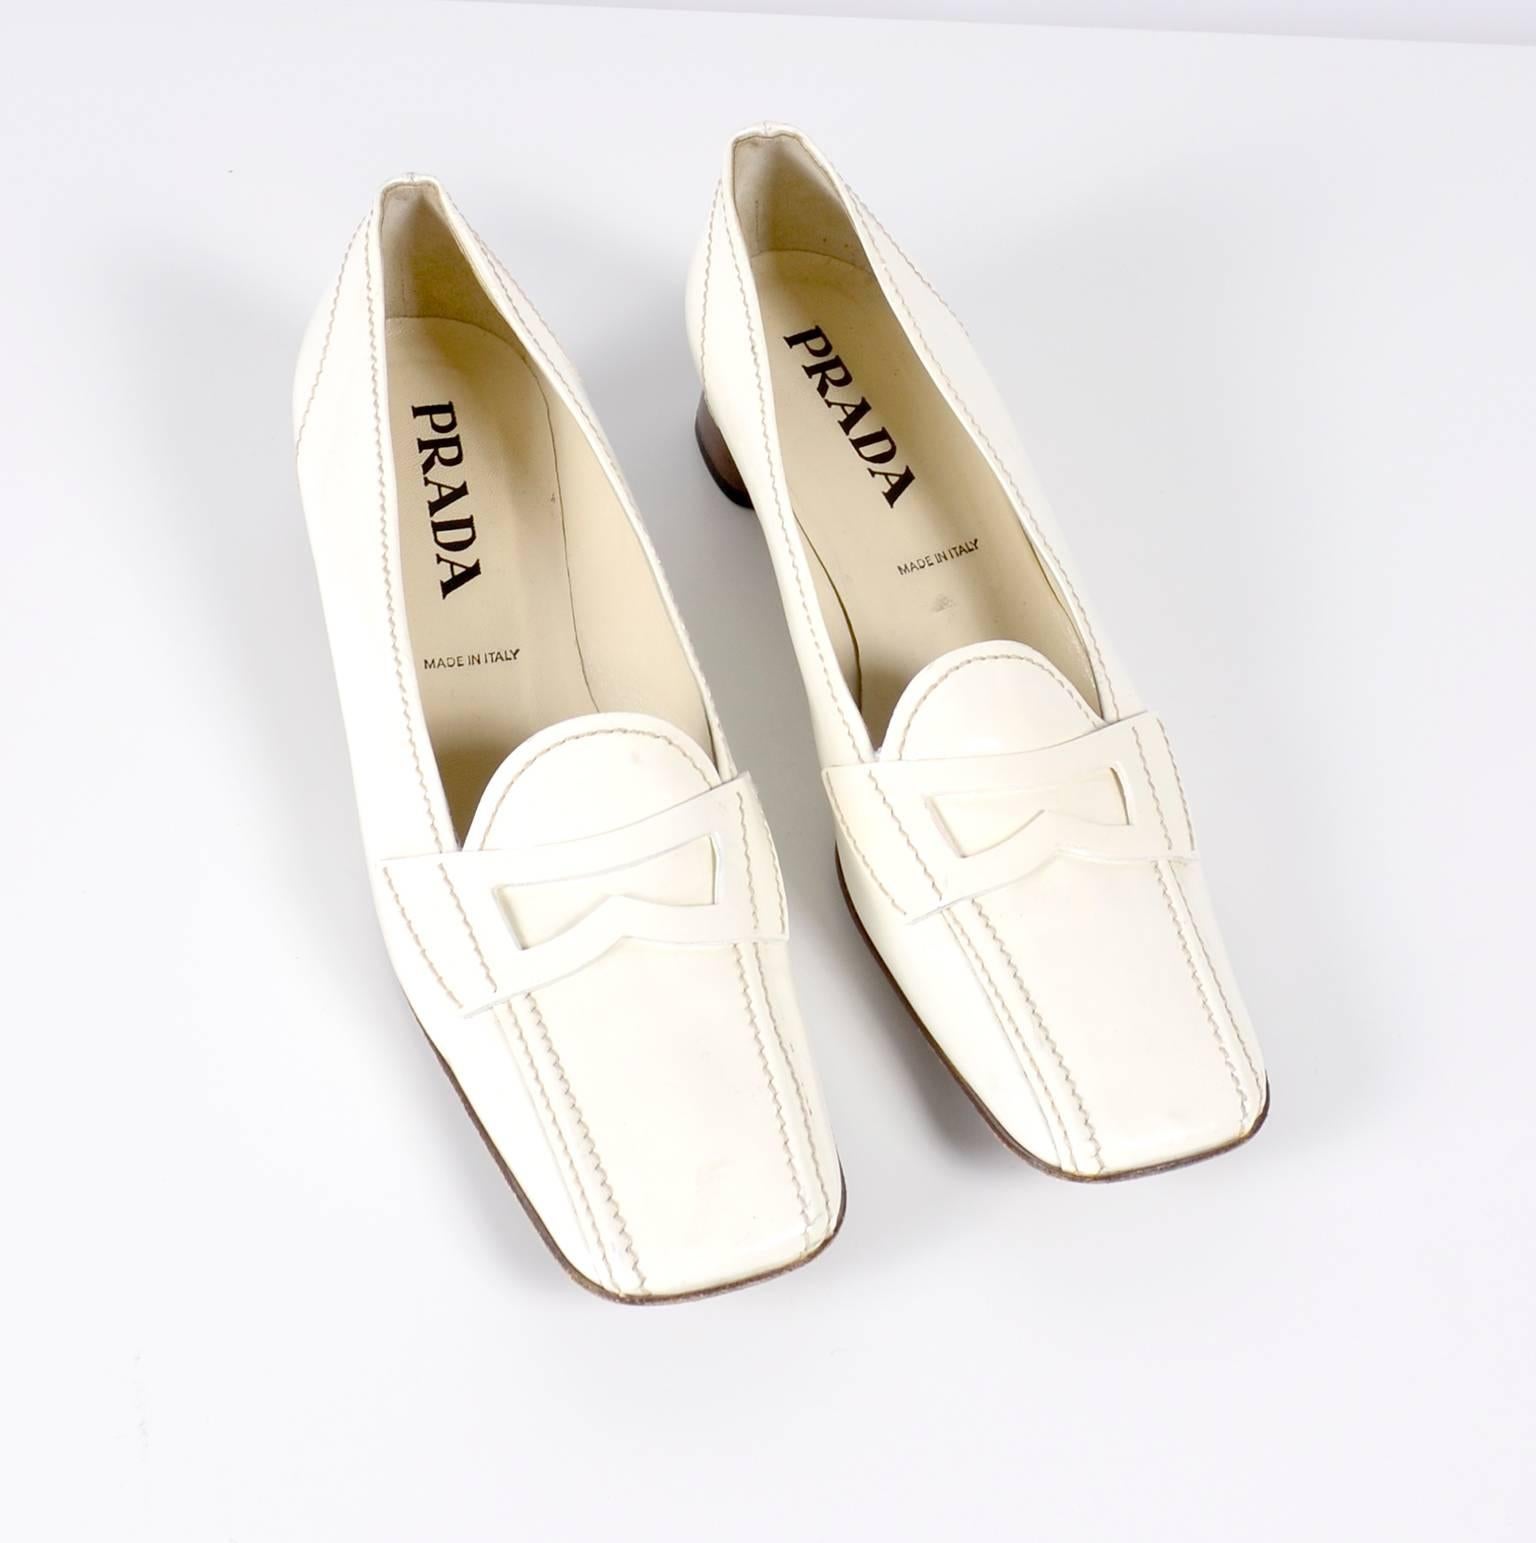 Beige Vintage Prada Shoes W/ Square Toes & Block Heels in Ivory Patent Leather